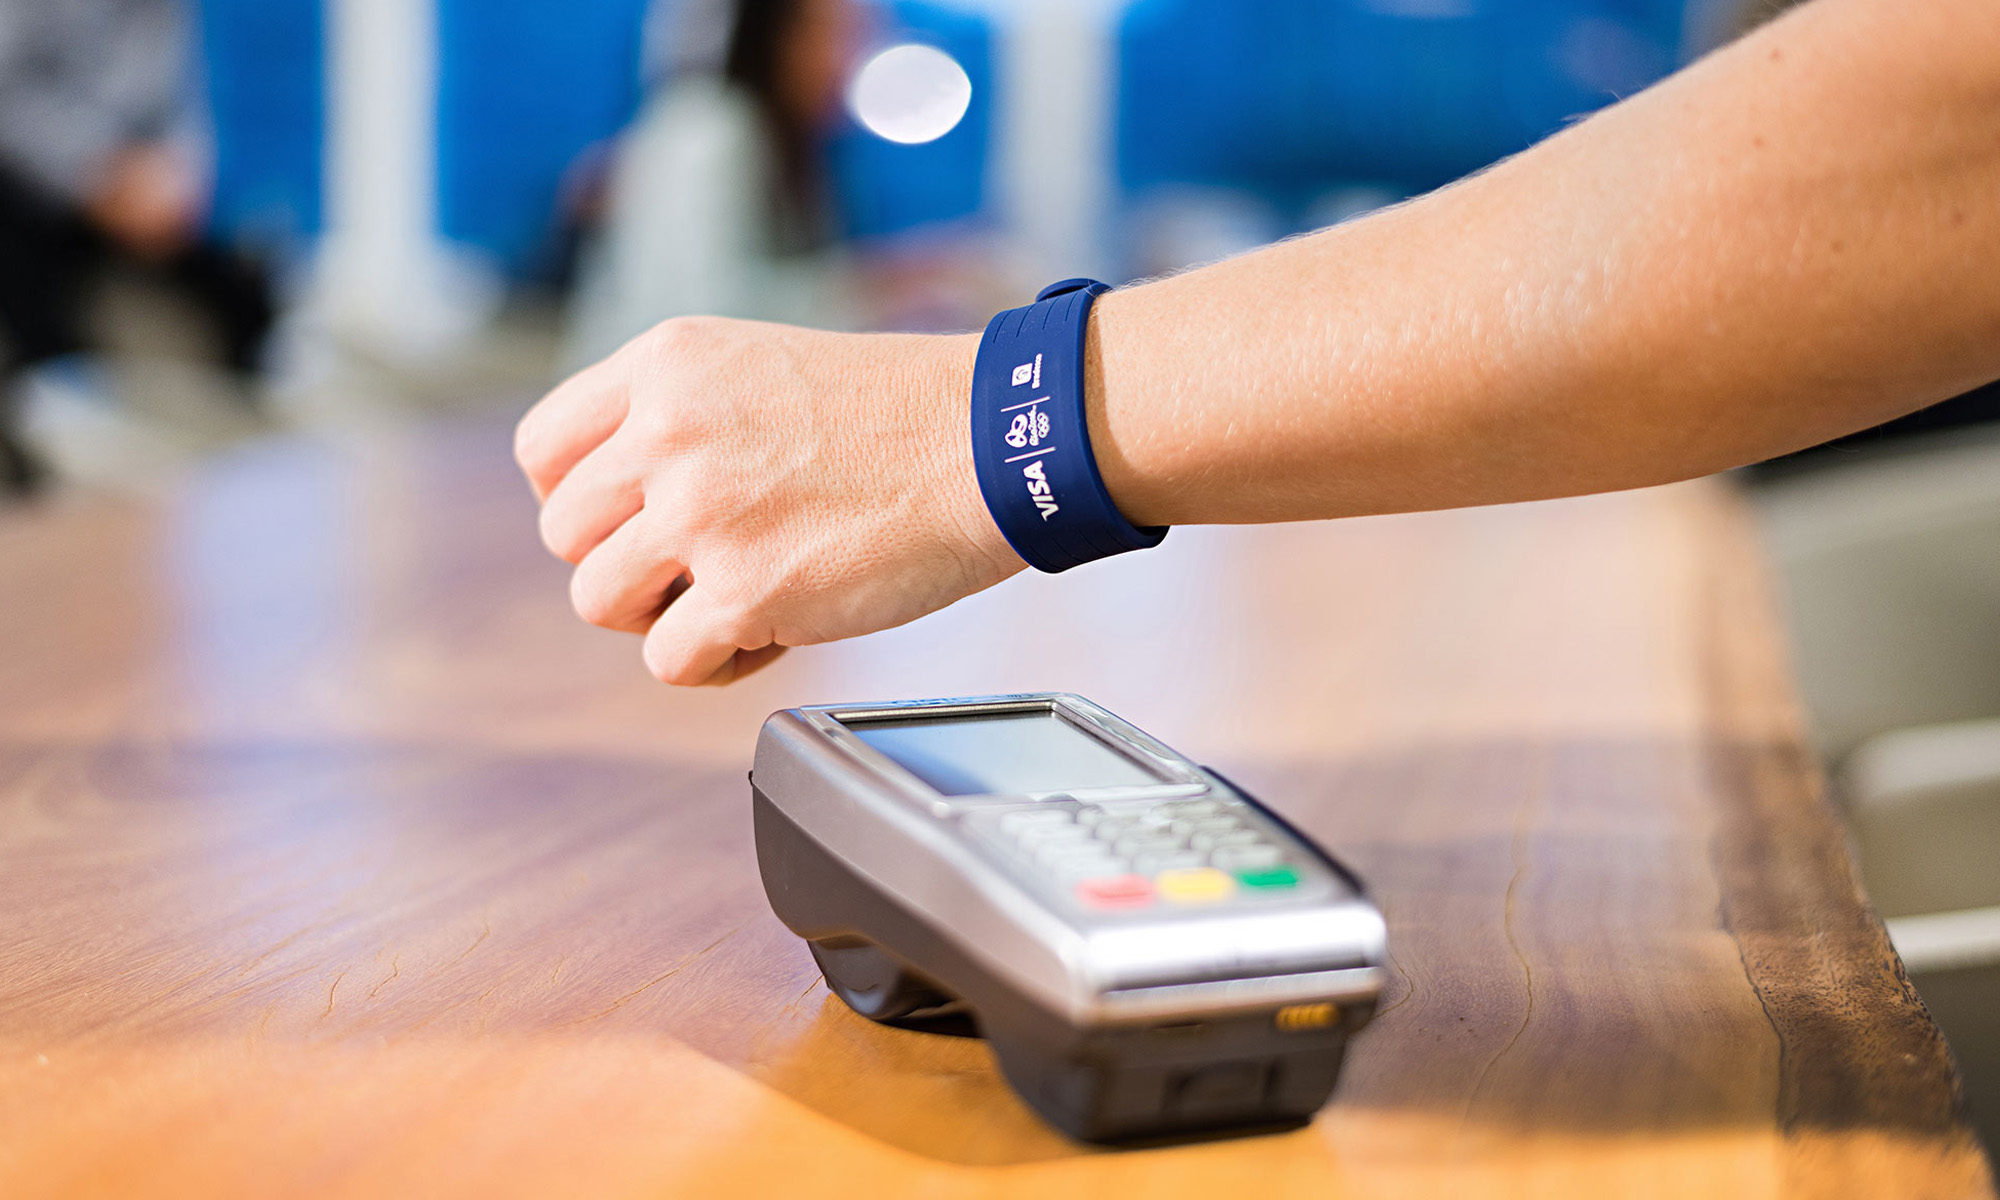 dukhan bank to launch wristband-based payment option